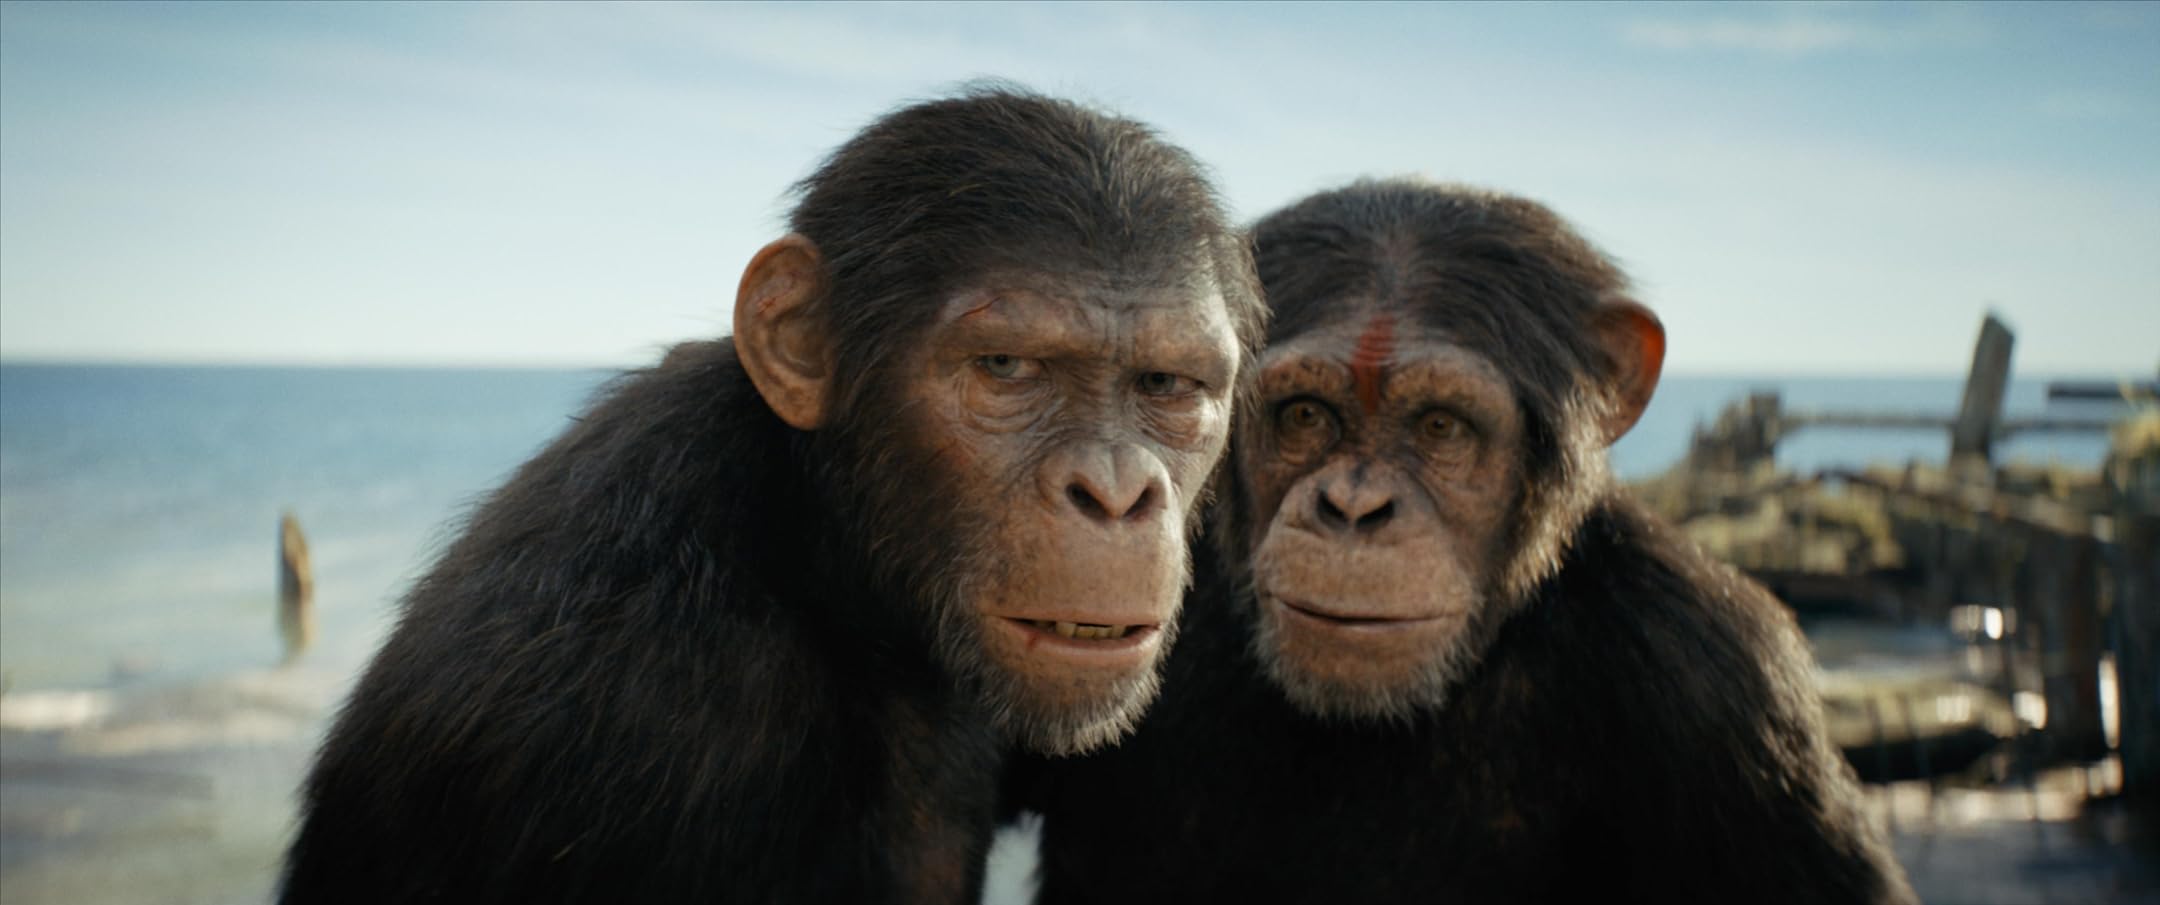 Jeremy Butler Reviews Kingdom Of The Planet Of The Apes